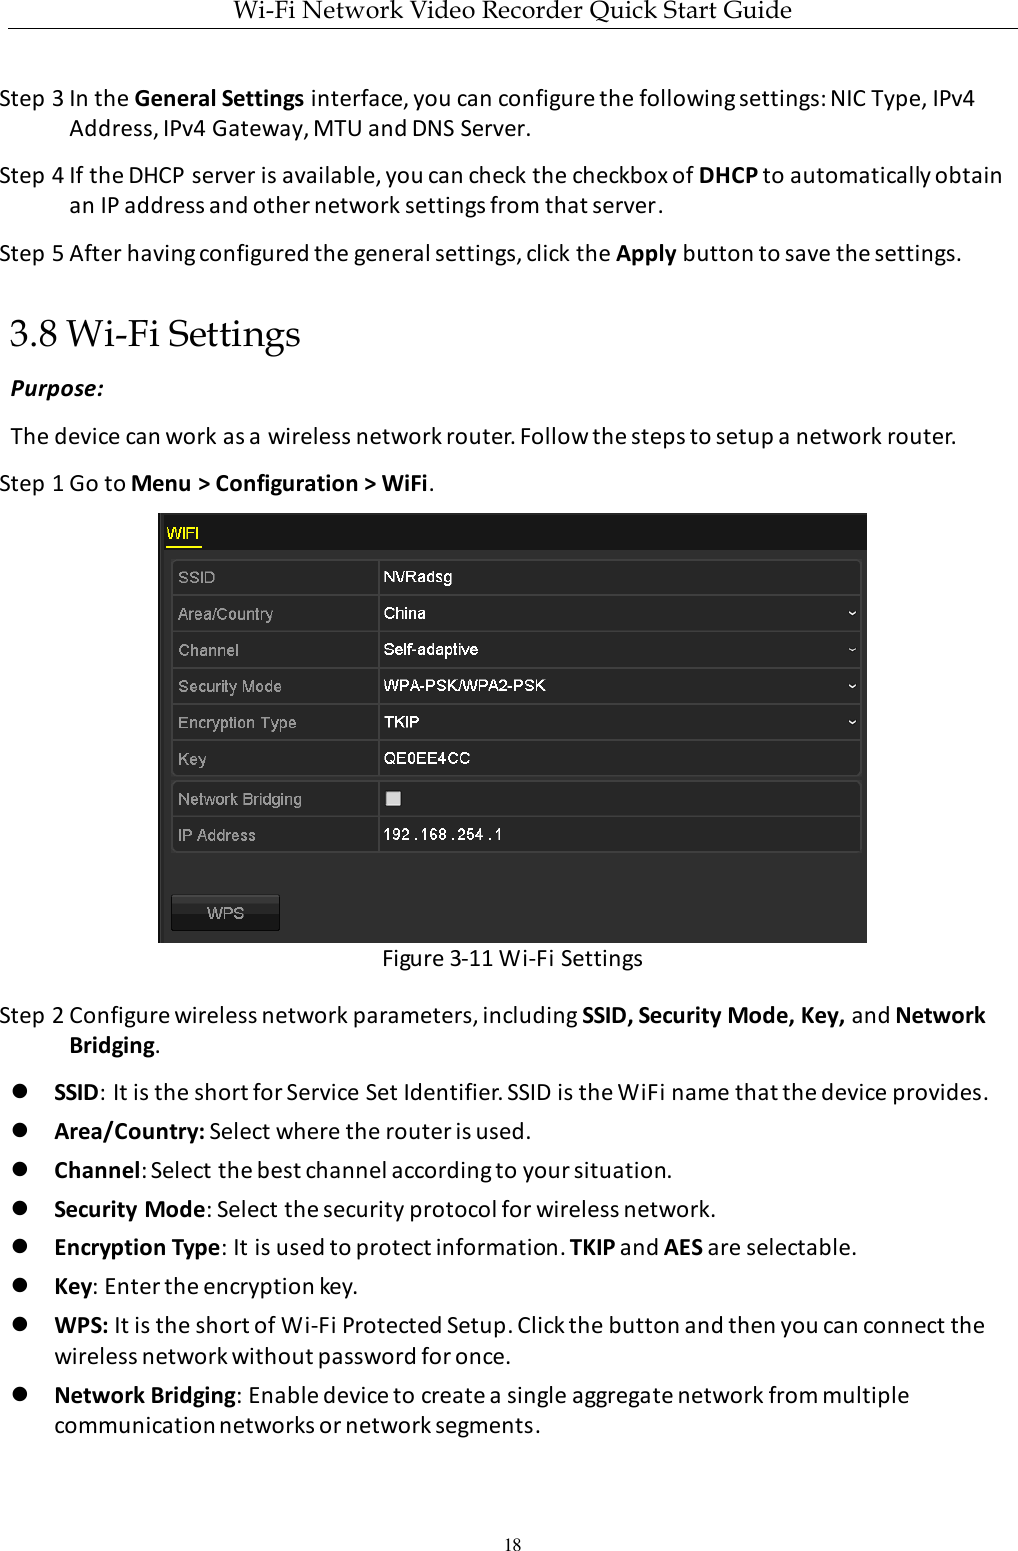 Wi-Fi Network Video Recorder Quick Start Guide 18 Step 3 In the General Settings interface, you can configure the following settings: NIC Type, IPv4 Address, IPv4 Gateway, MTU and DNS Server. Step 4 If the DHCP server is available, you can check the checkbox of DHCP to automatically obtain an IP address and other network settings from that server. Step 5 After having configured the general settings, click the Apply button to save the settings.   3.8 Wi-Fi Settings Purpose: The device can work as a wireless network router. Follow the steps to setup a network router. Step 1 Go to Menu &gt; Configuration &gt; WiFi.  Figure 3-11 Wi-Fi Settings Step 2 Configure wireless network parameters, including SSID, Security Mode, Key, and Network Bridging.  SSID: It is the short for Service Set Identifier. SSID is the WiFi name that the device provides.  Area/Country: Select where the router is used.  Channel: Select the best channel according to your situation.  Security Mode: Select the security protocol for wireless network.  Encryption Type: It is used to protect information. TKIP and AES are selectable.  Key: Enter the encryption key.  WPS: It is the short of Wi-Fi Protected Setup. Click the button and then you can connect the wireless network without password for once.  Network Bridging: Enable device to create a single aggregate network from multiple communication networks or network segments. 